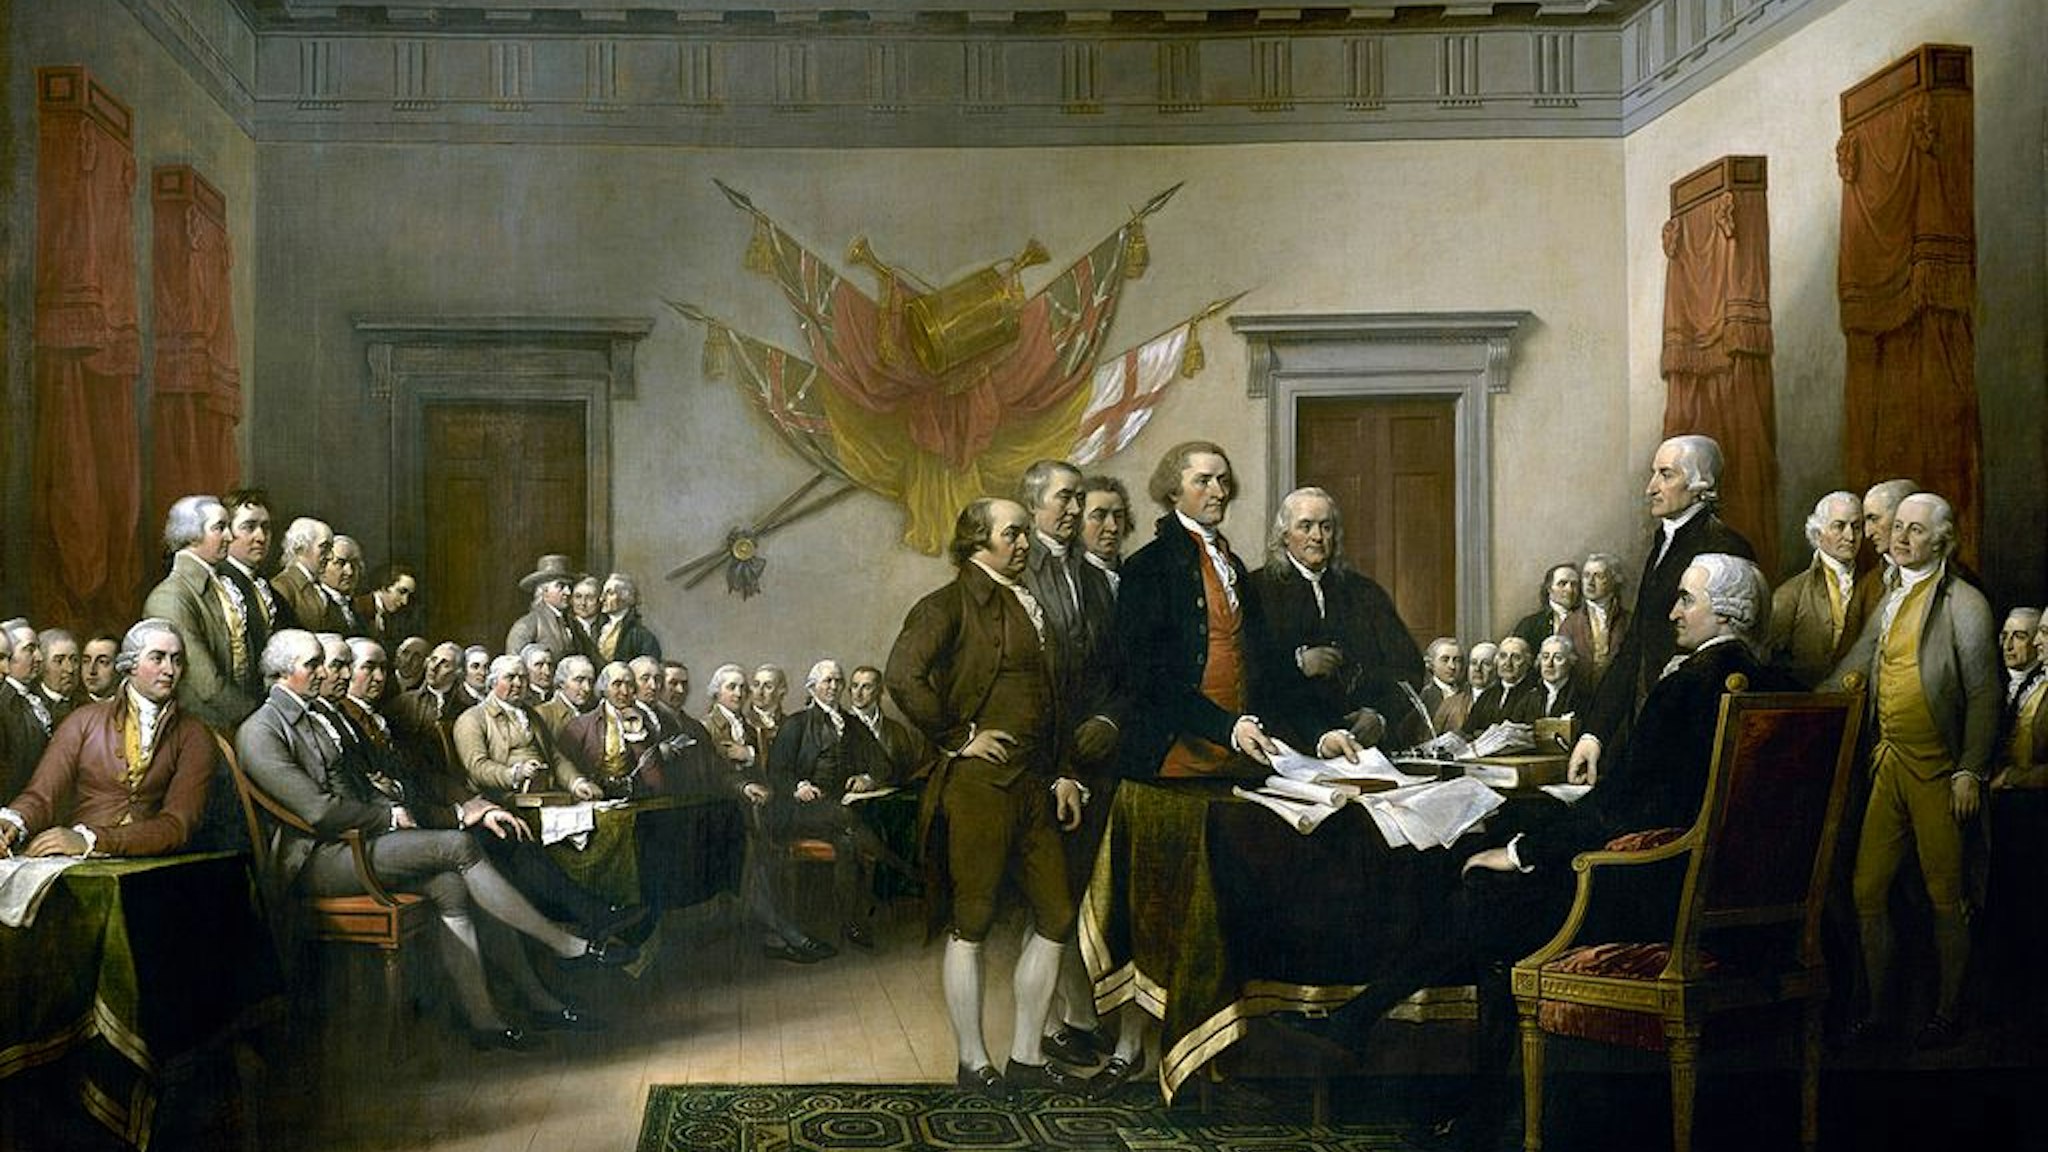 UNSPECIFIED - CIRCA 1754: John Trumbull's painting, Declaration of Independence, depicting the five-man drafting committee of the Declaration of Independence presenting their work to the Congress. The painting can be found on the back of the U.S. $2 bill. The original hangs in the US Capitol rotunda.